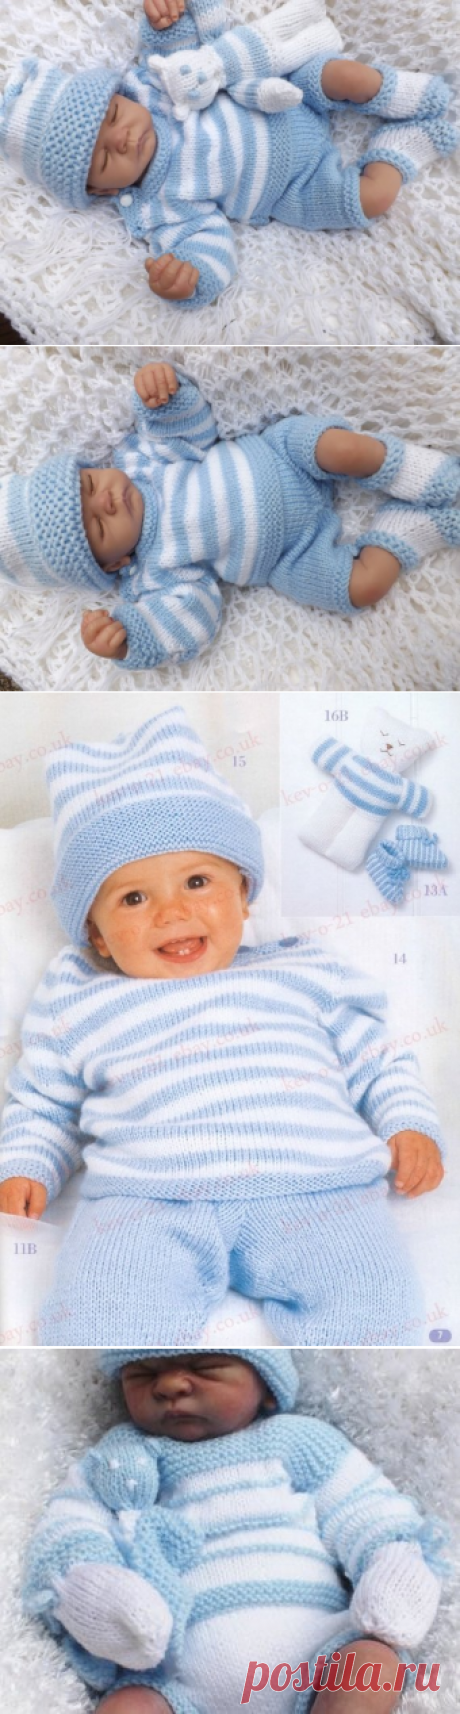 baby knitting pattern striped sweater pants hat booties and | Etsy